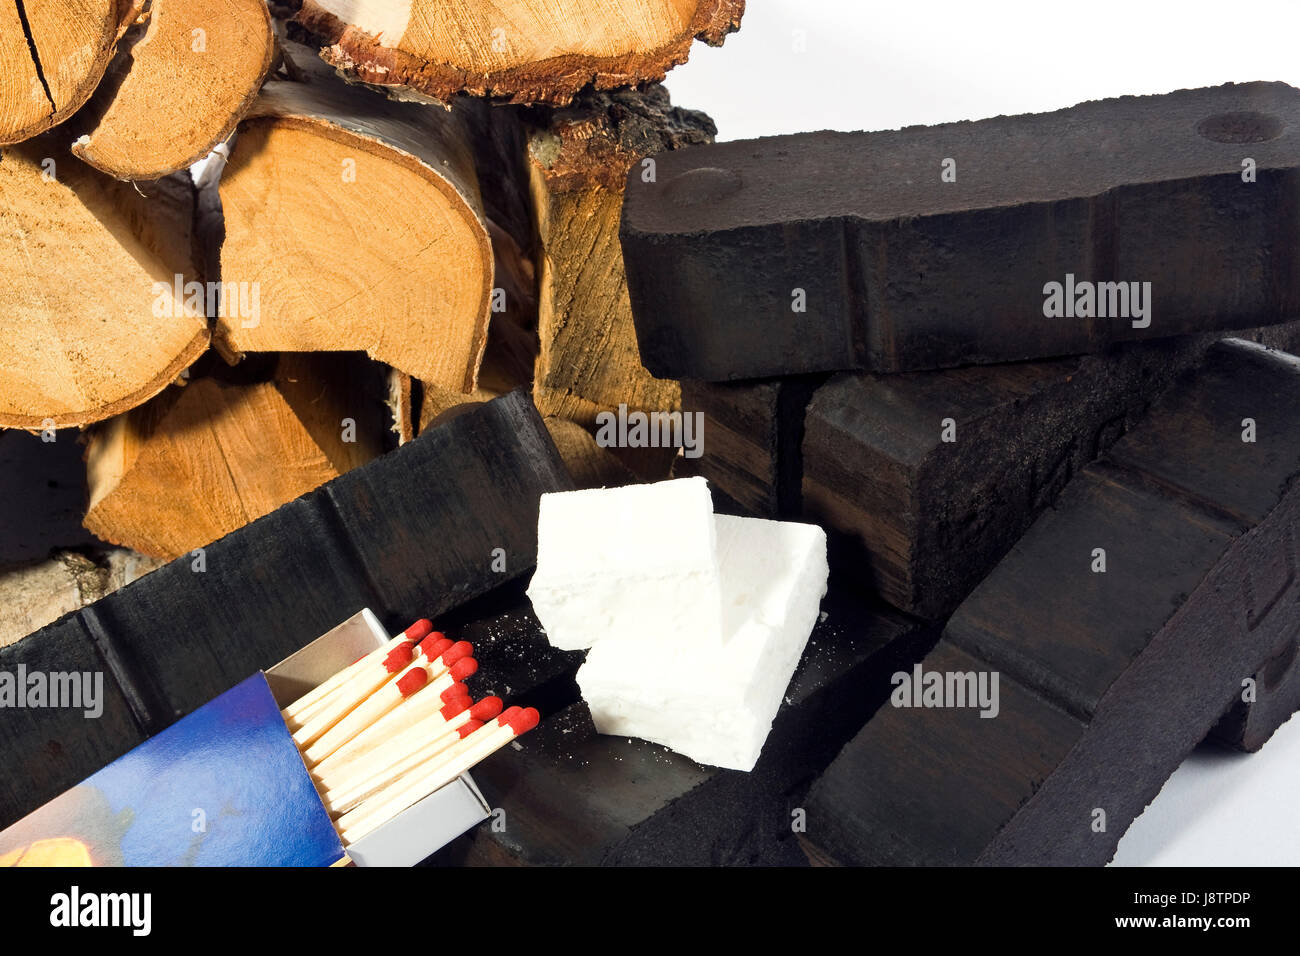 wood, coal, fireplace, stove, heating, firewood, coals, briquettes, ovens, Stock Photo